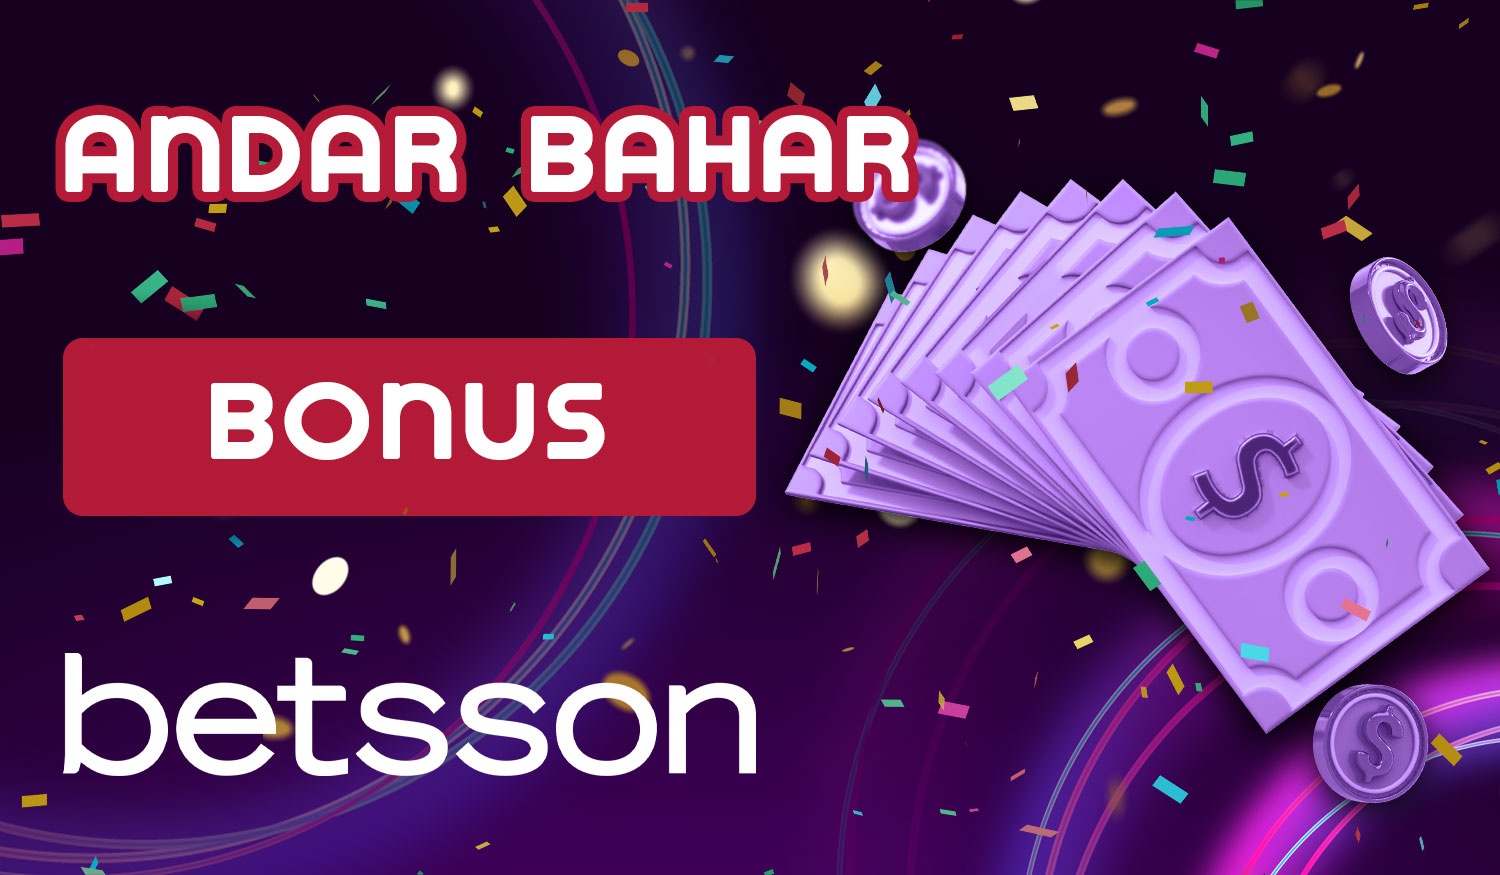 The online casino Betsson provides special bonuses for fans of the game Andar Bahar